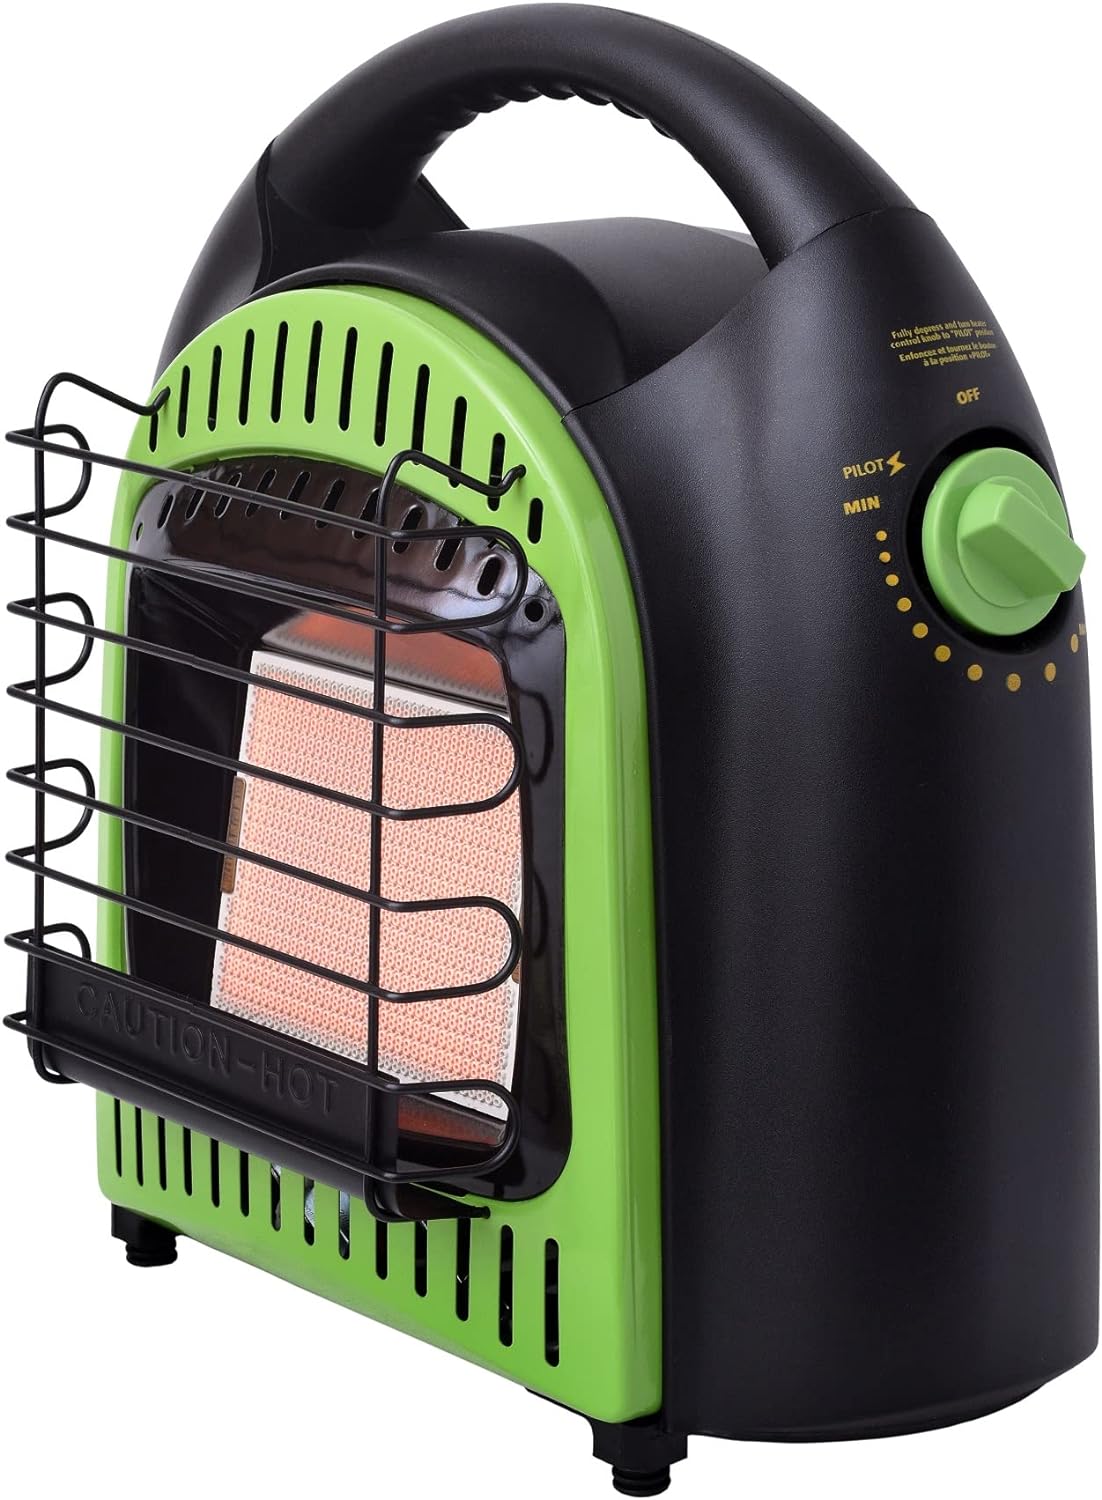 Flame King Propane Space Radiant Portable Heater Review